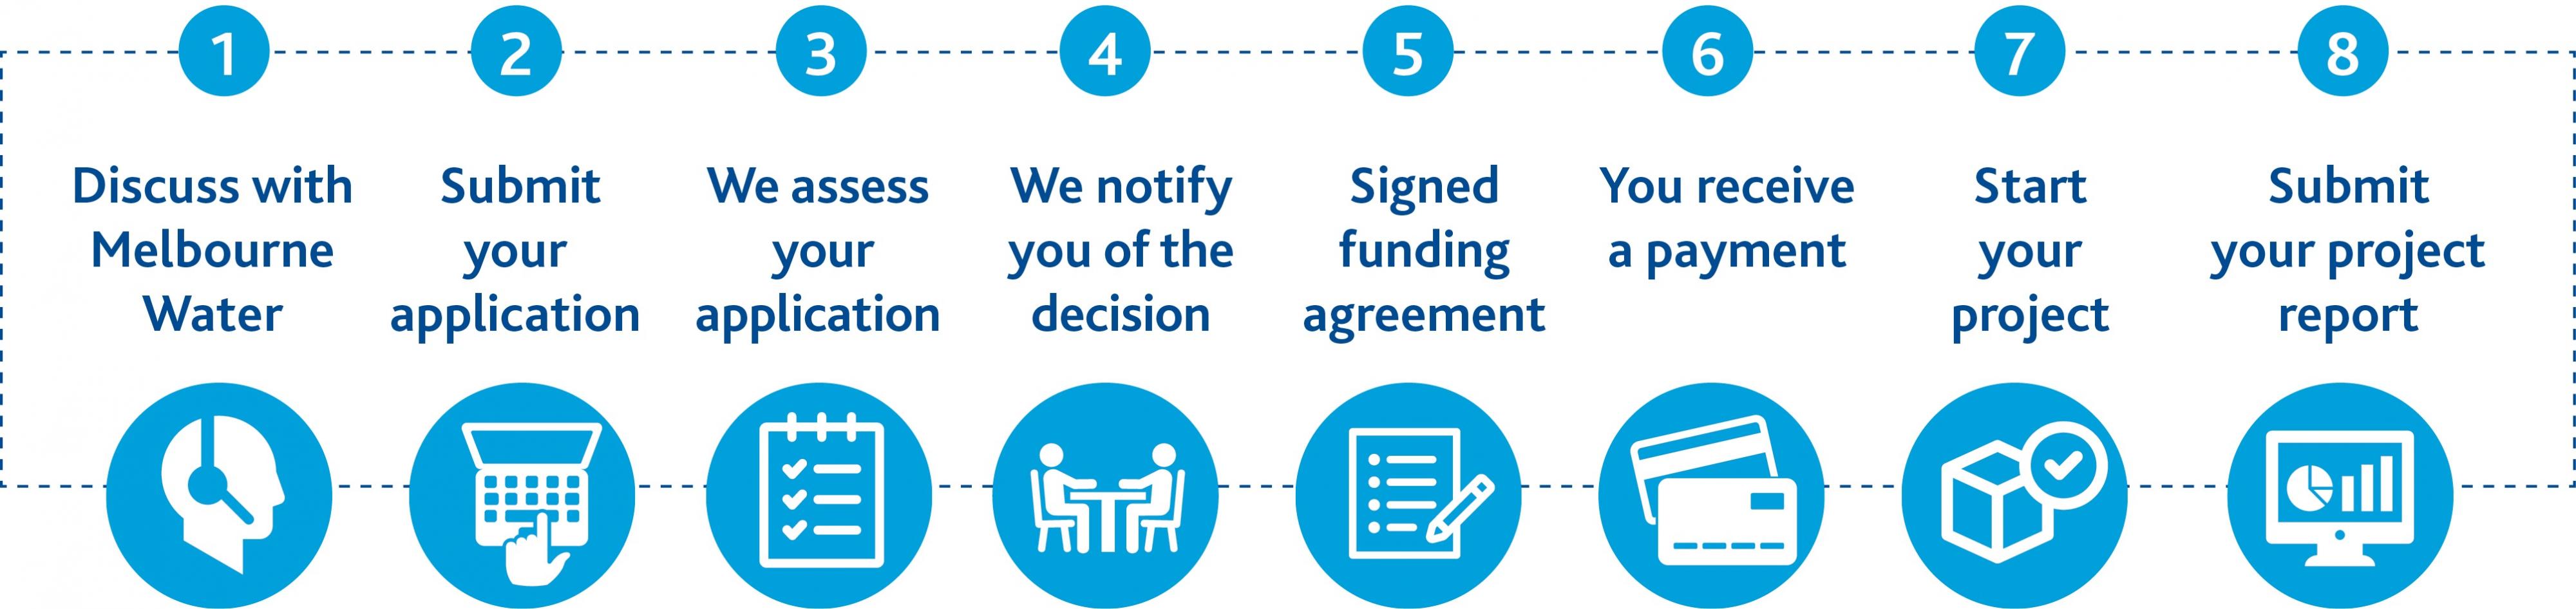 8-step application and funding process